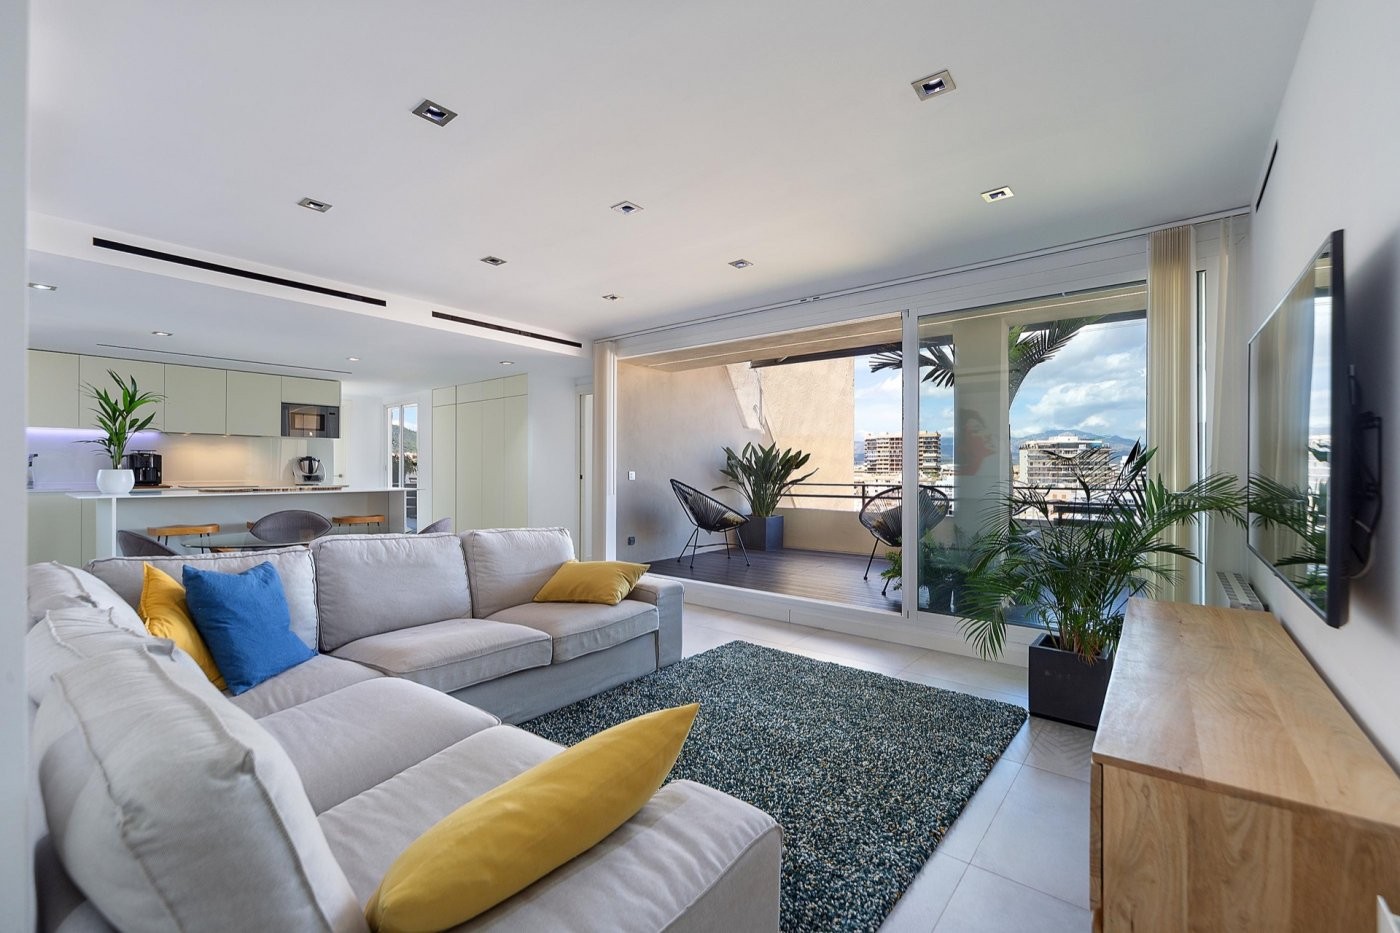 Modern, light-filled penthouse in the school area of Palma, with terraces and unobstructed views.